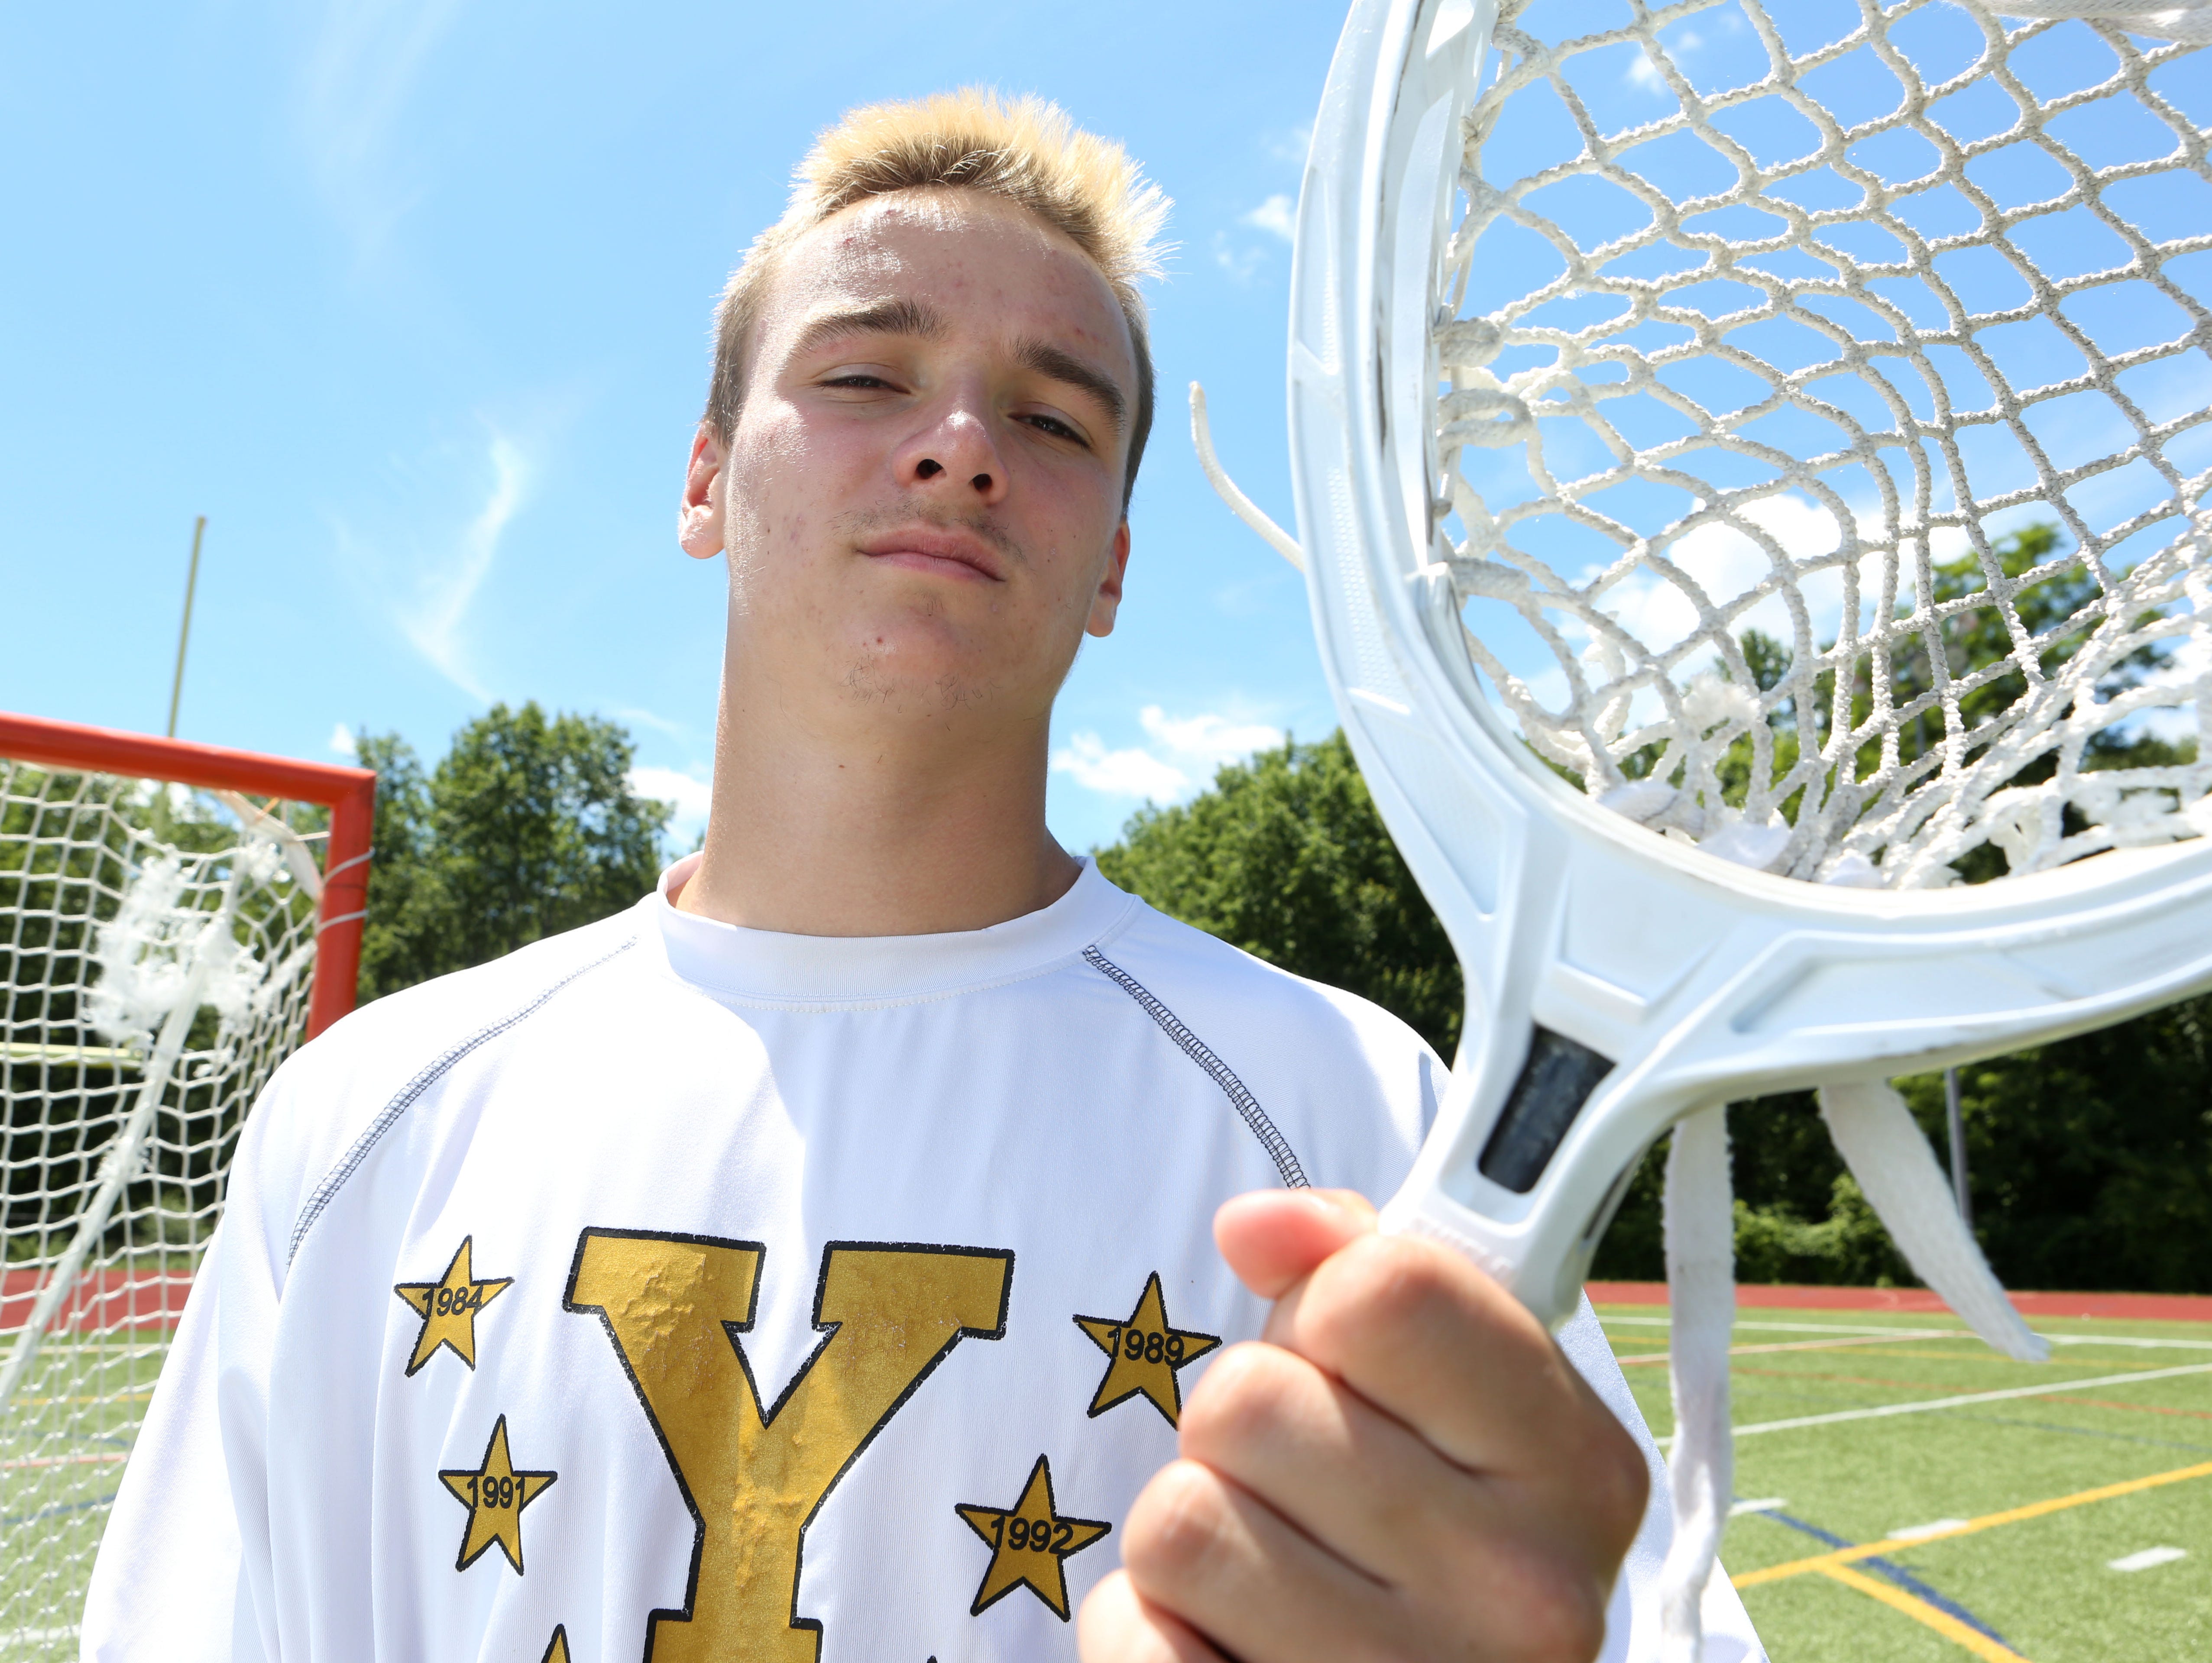 Yorktown boys lacrosse goalie Liam Donnelly, the Westchester/Putnam player of the year, at Yorktown High School June 30, 2016.